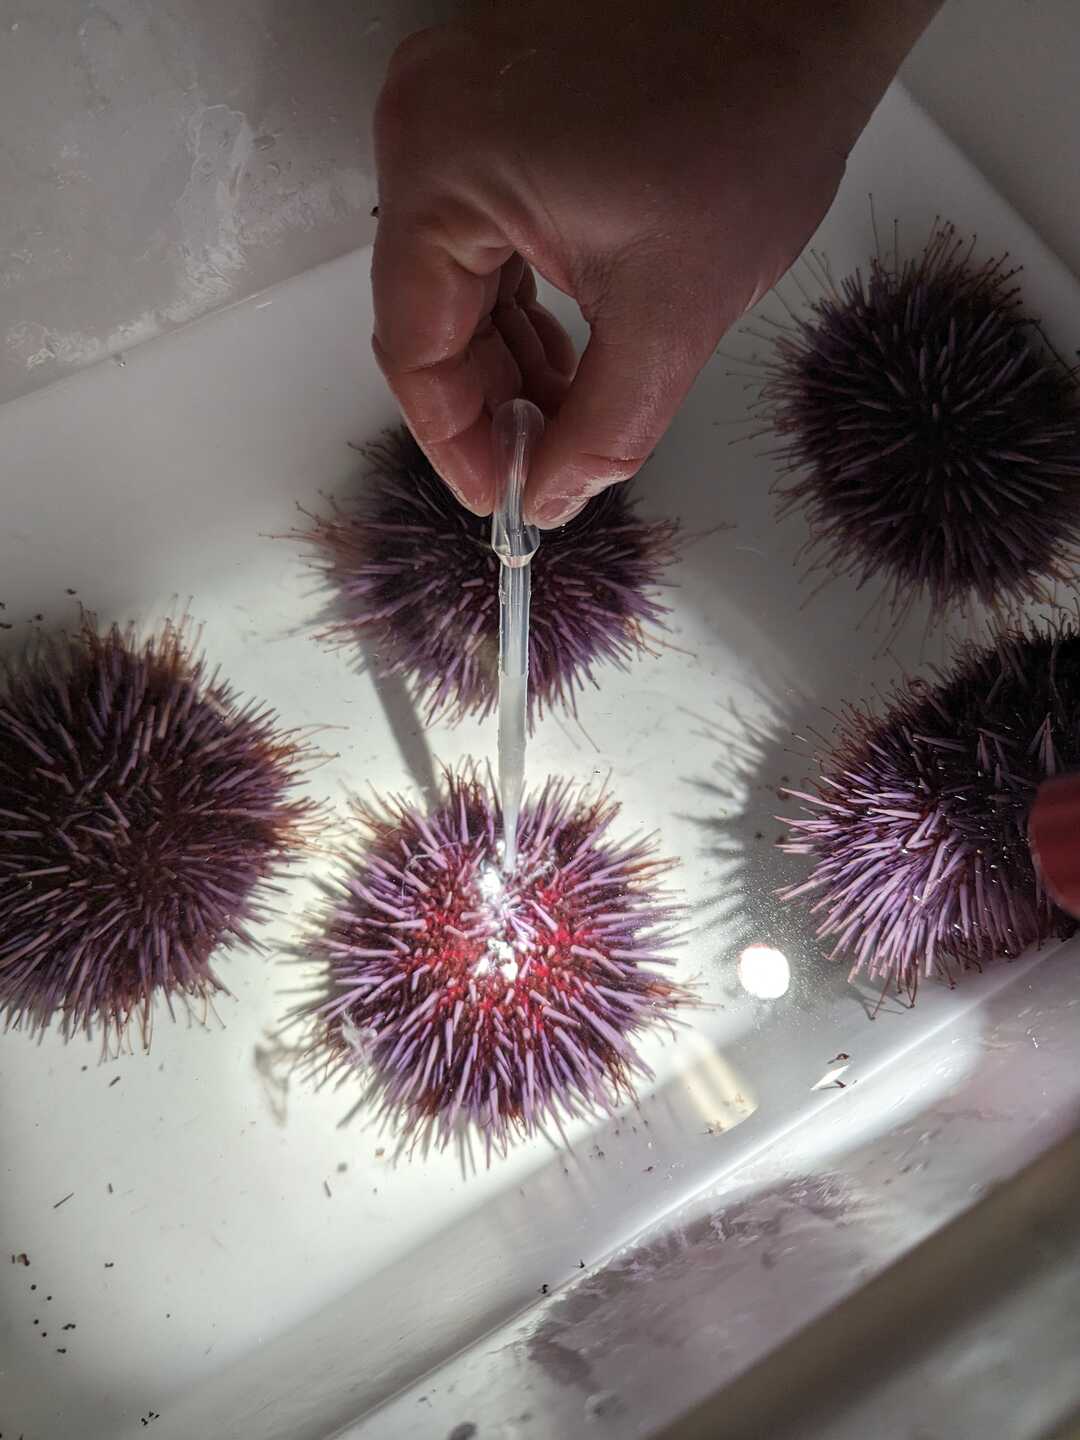 An Academy biologist injects a substance into a purple urchin in preparation for reproduction.